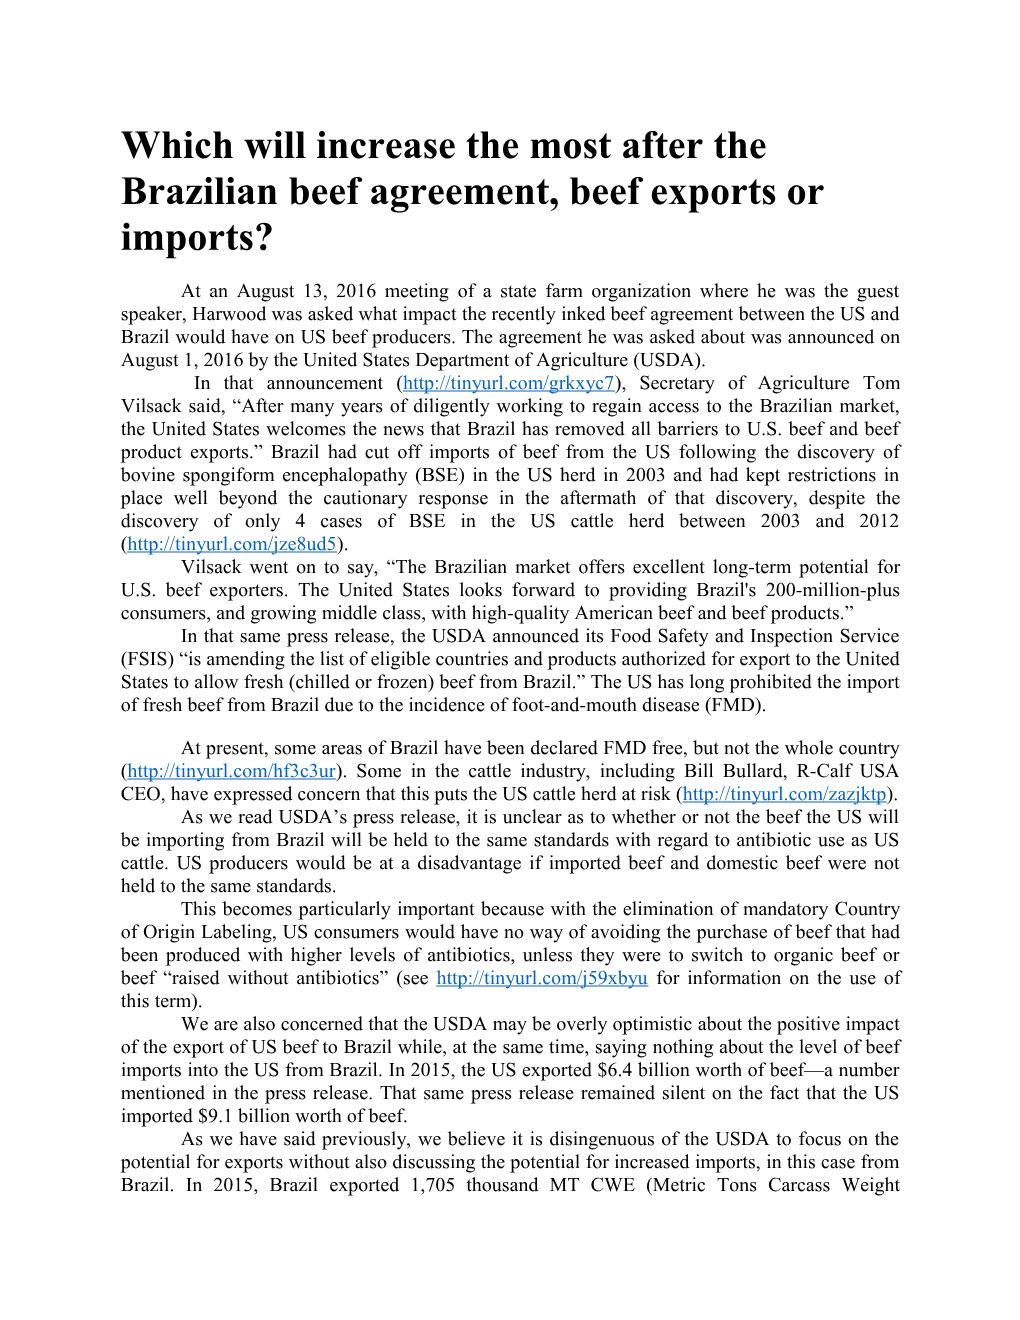 Which Will Increase the Most After the Brazilian Beef Agreement, Beef Exports Or Imports?